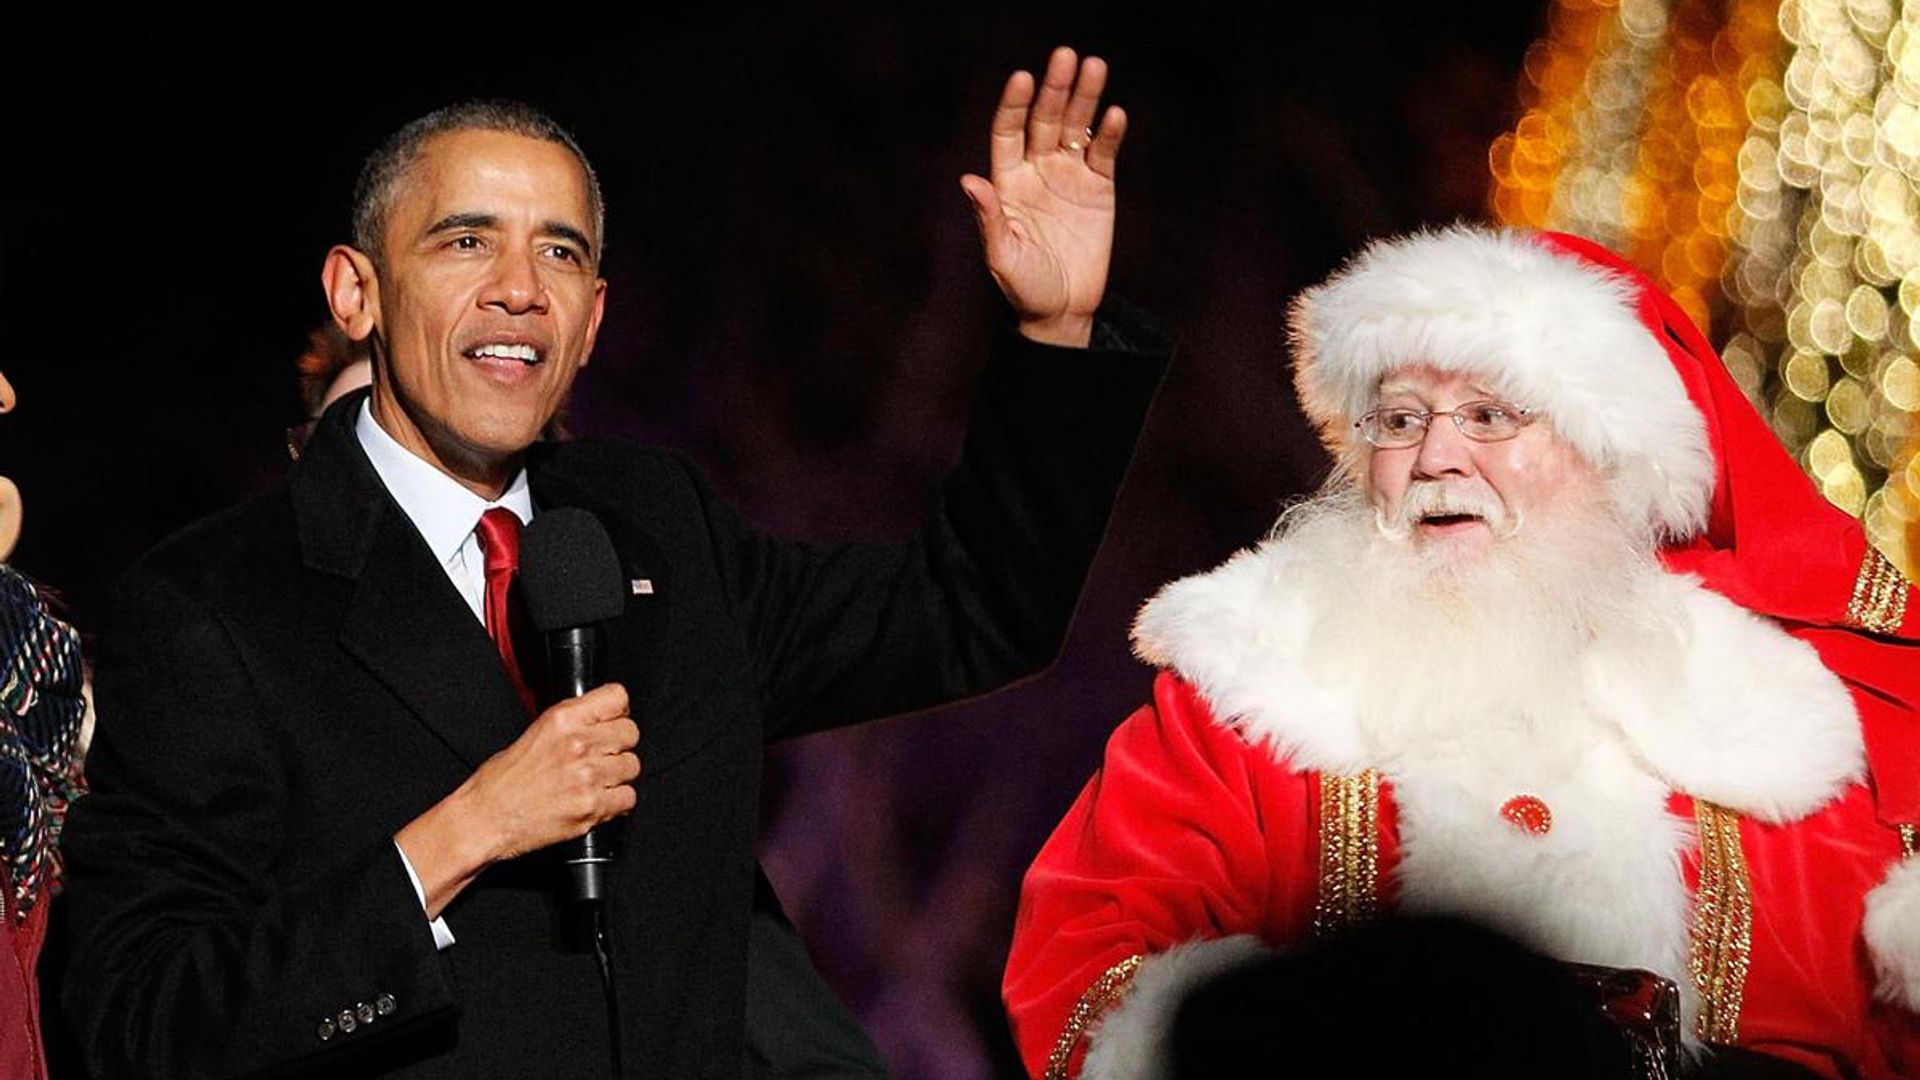 President Obama surprised a pre-k class by wearing a Santa Claus hat and holding a sack full of presents